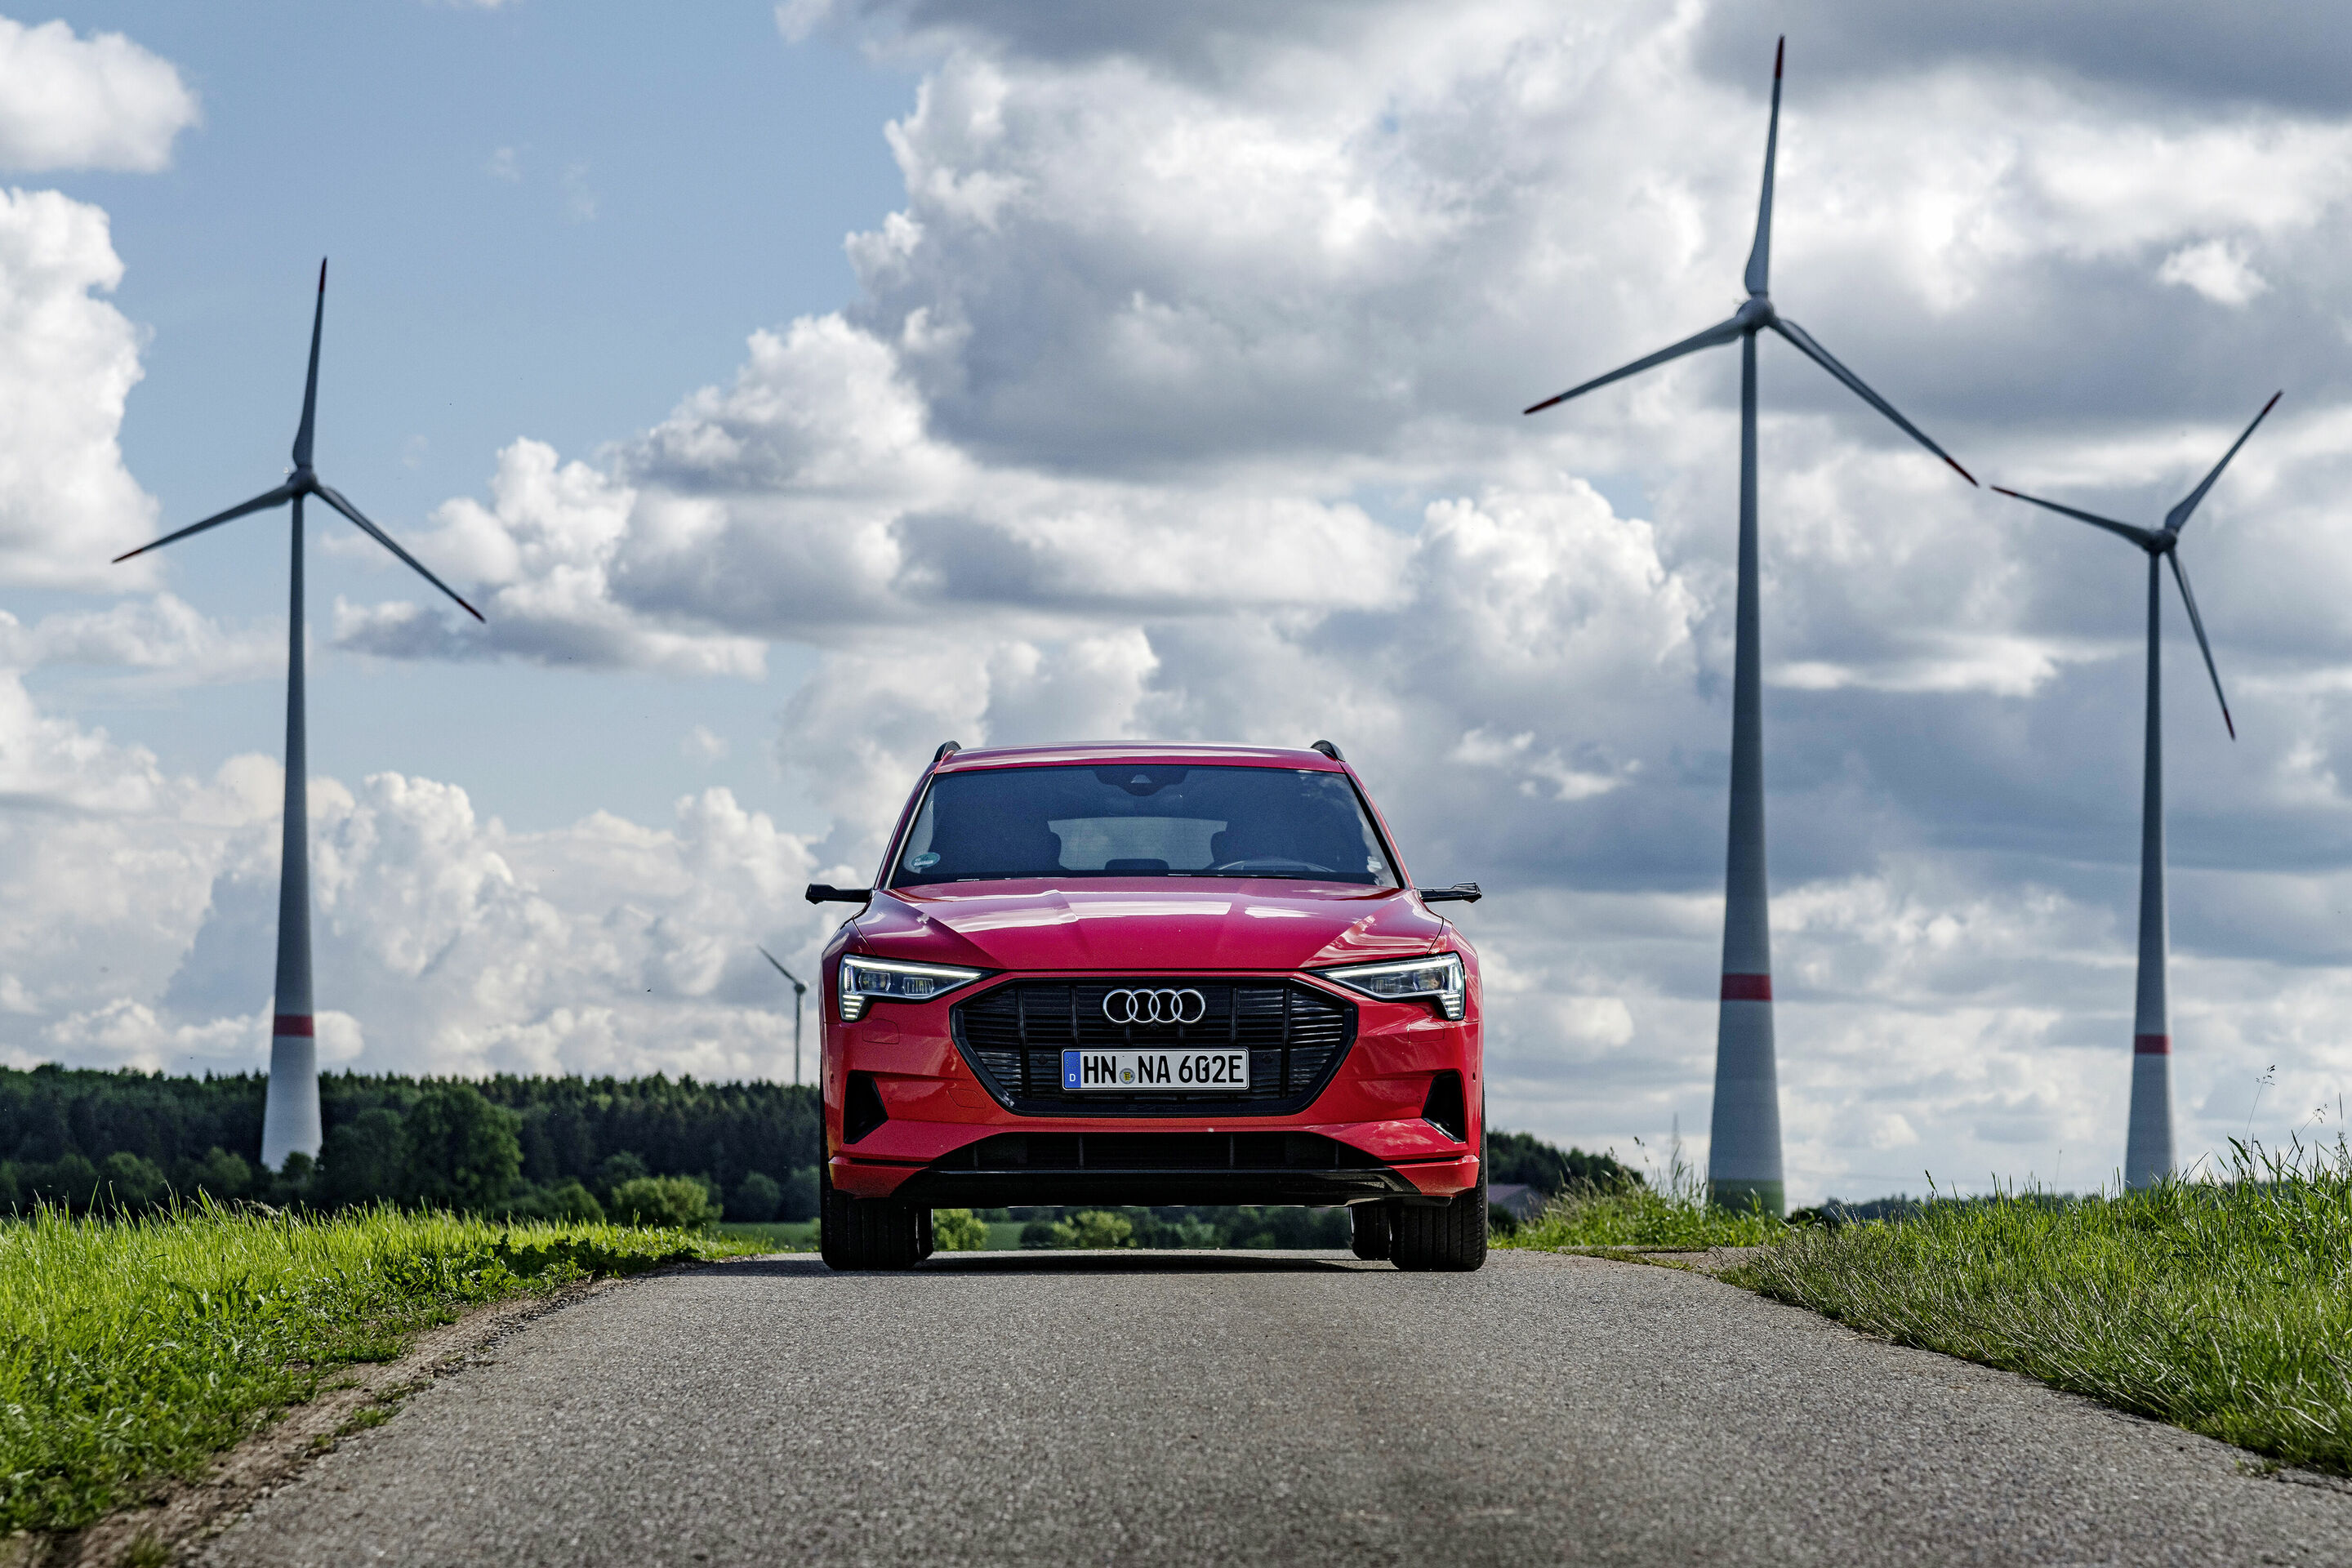 Audi and EnBW cooperate on battery storage